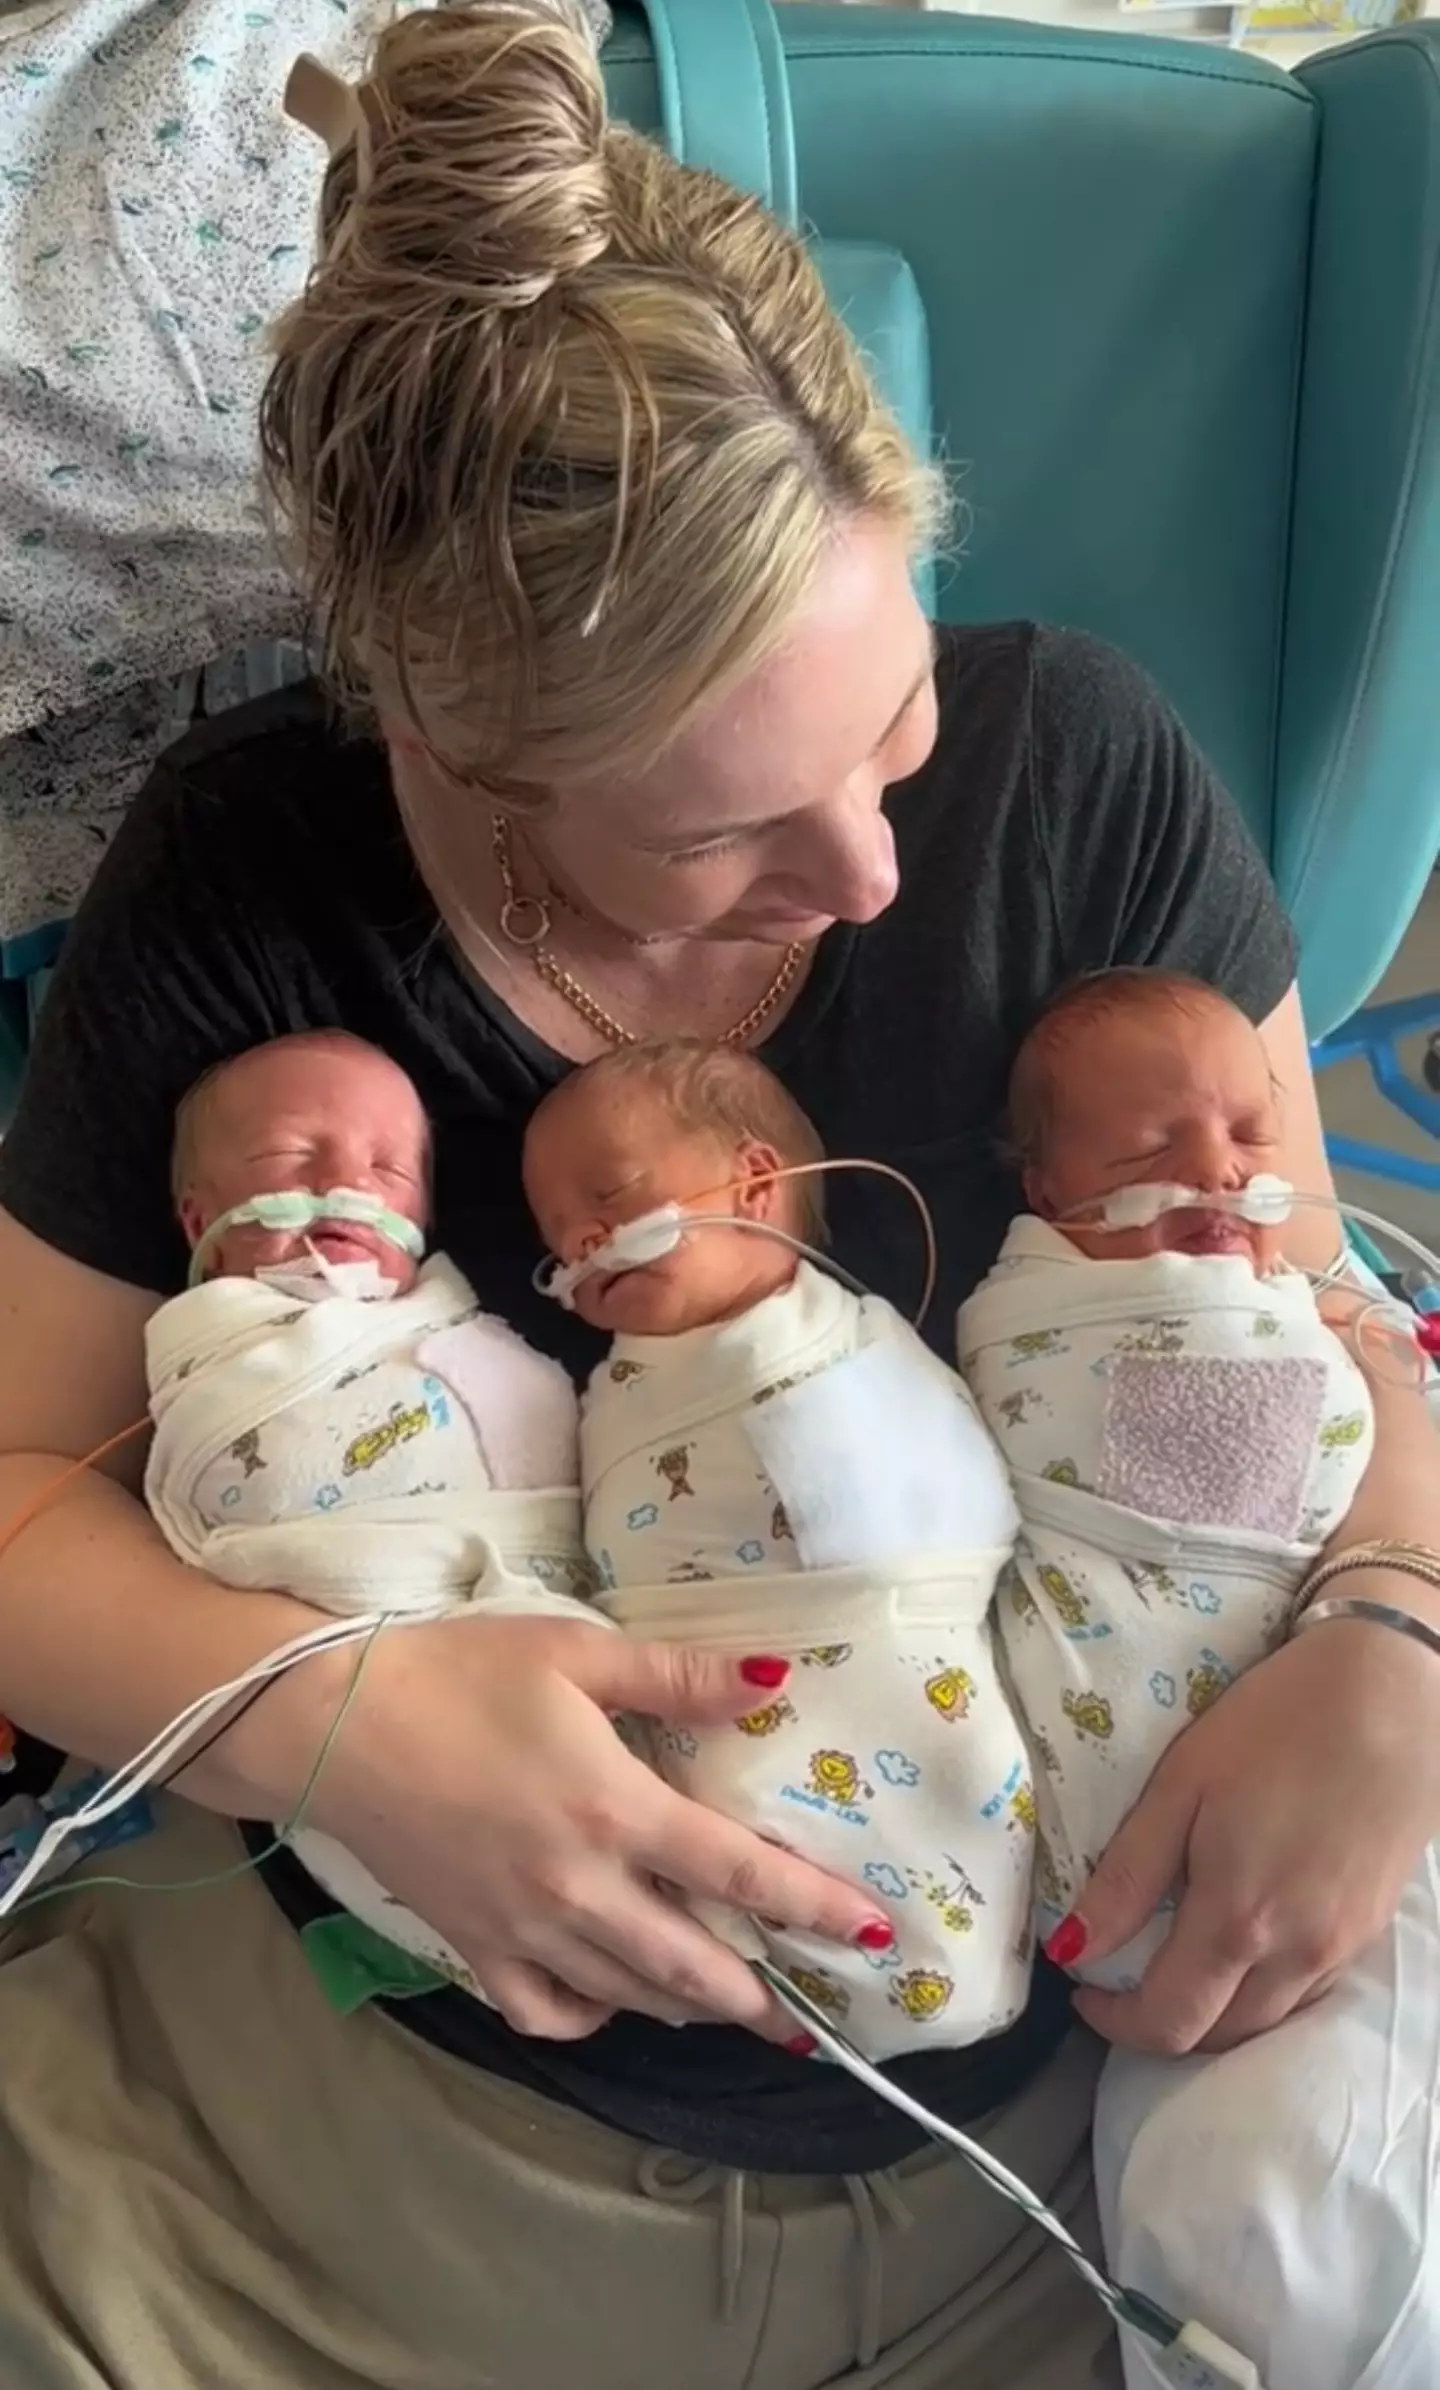 Schneider embraced the experience of being pregnant with triplets, who were born on 28 April.